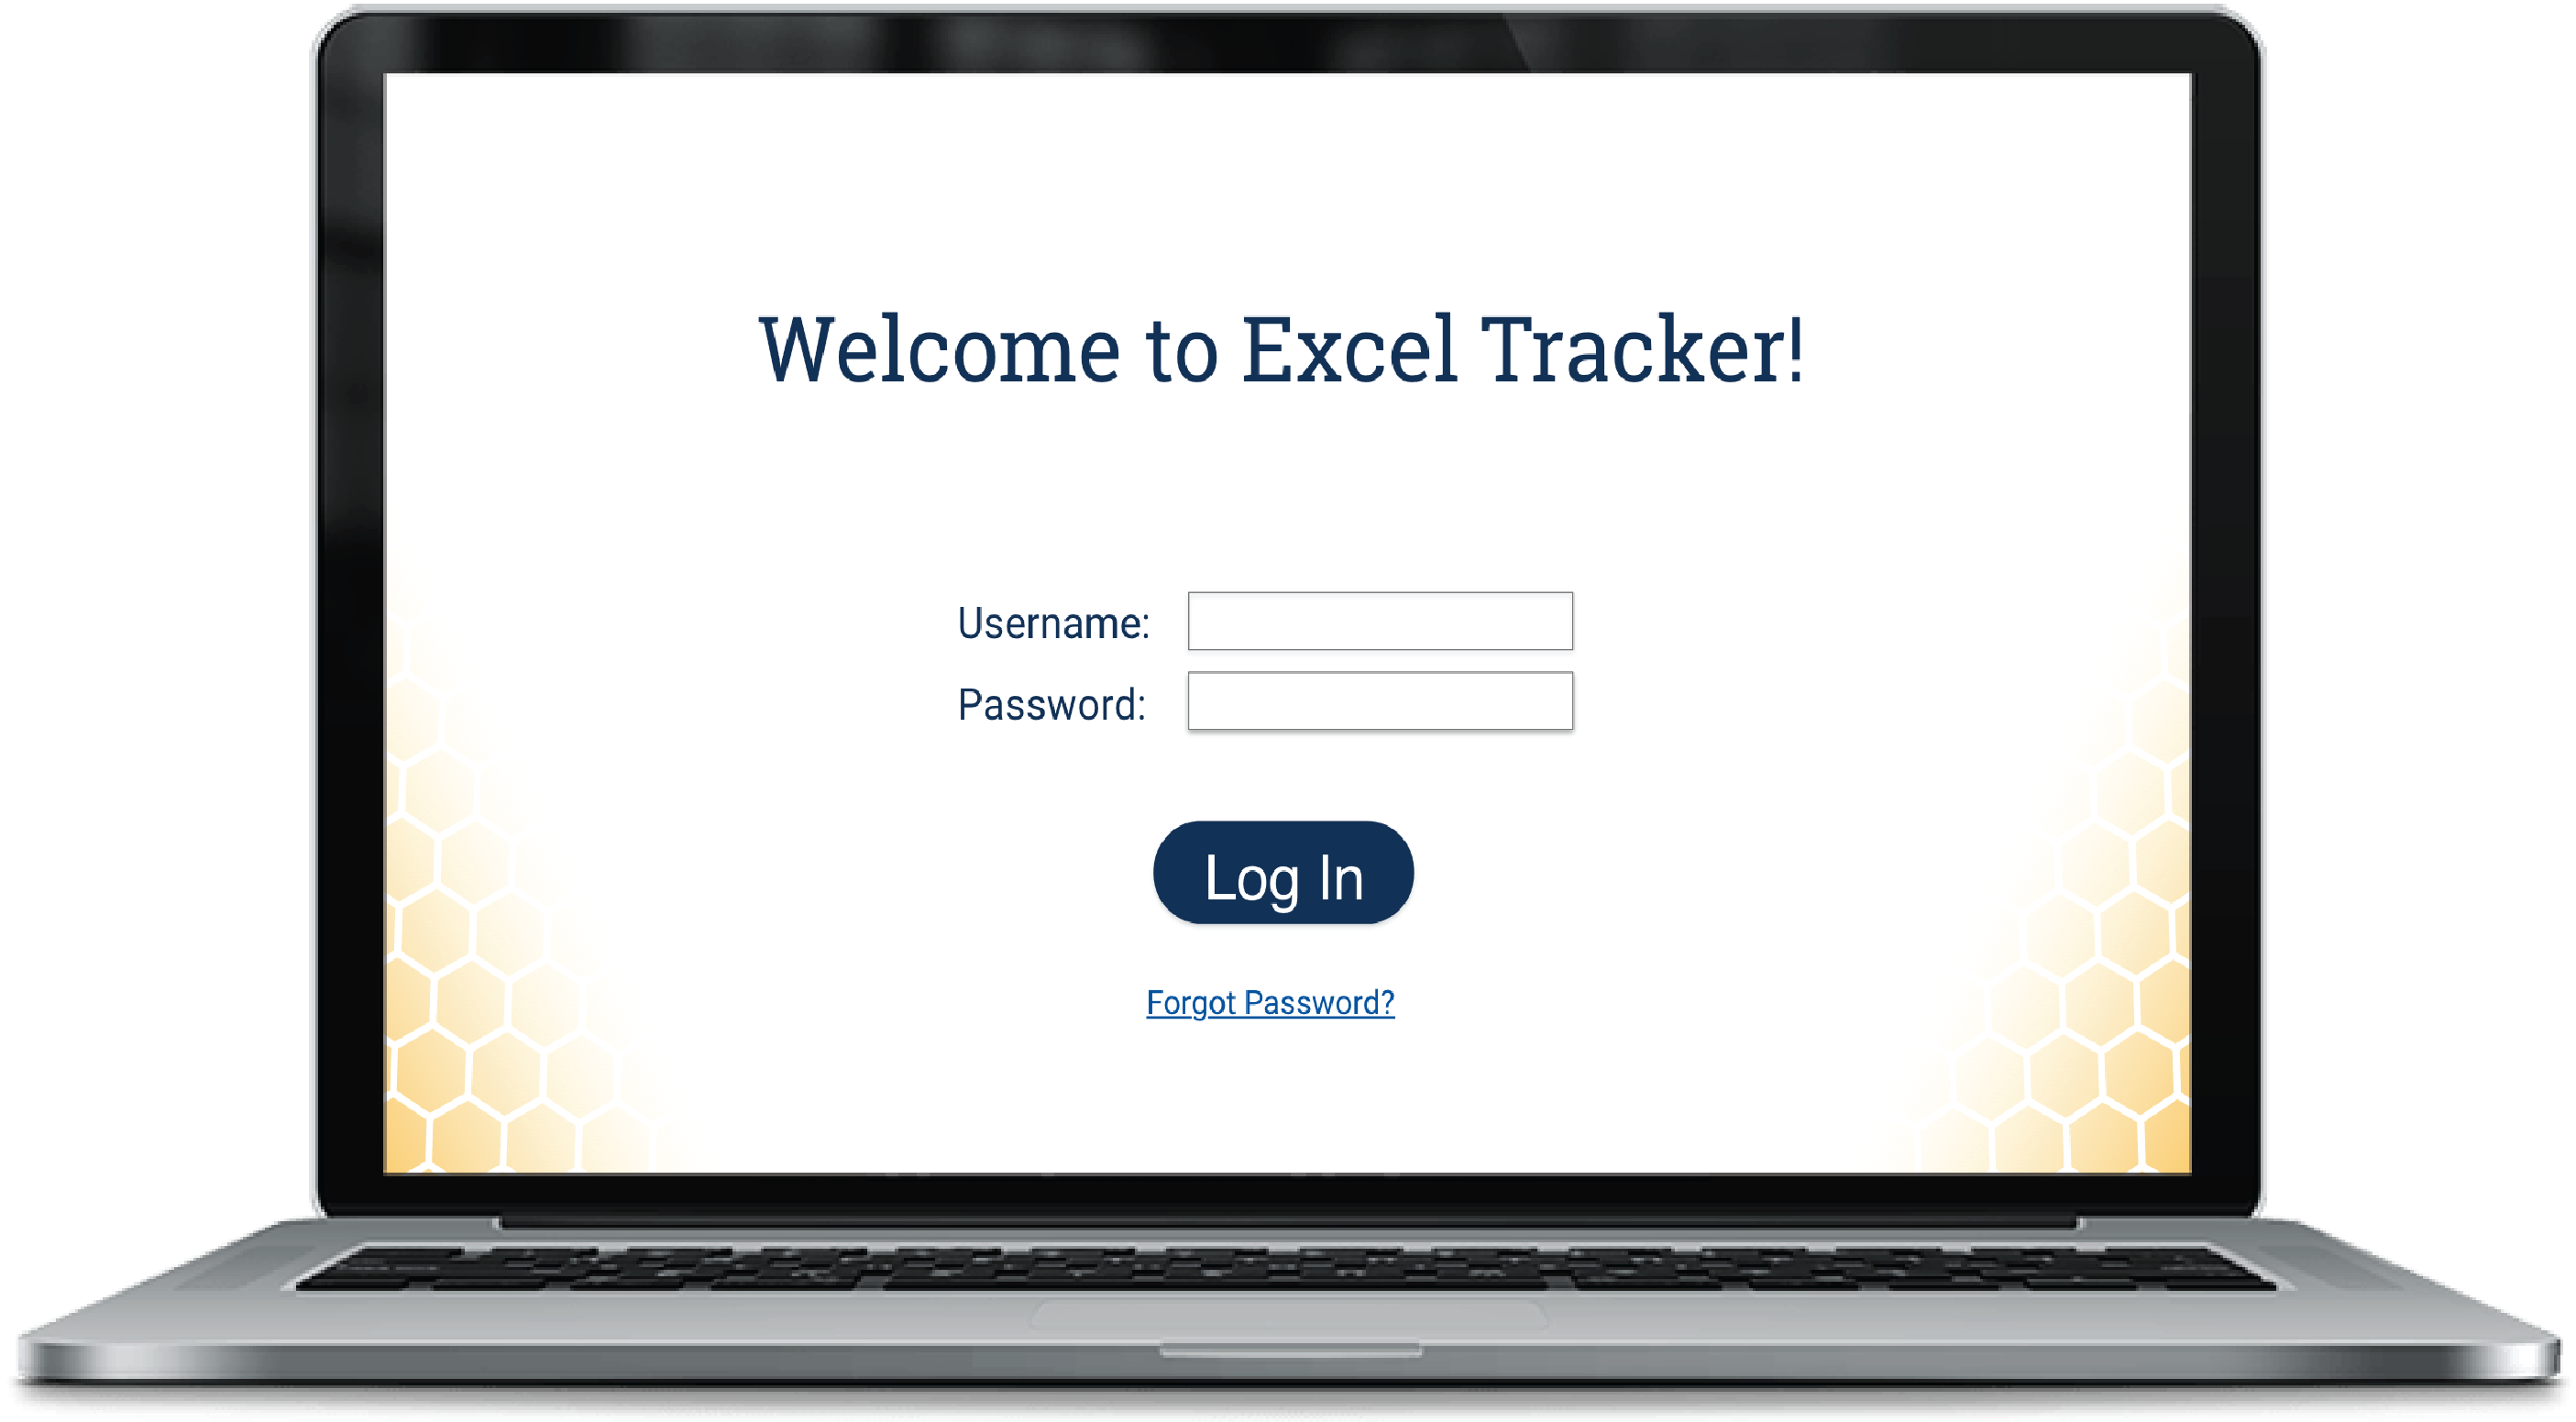 Log In screen for Excel Tracker, prototyped with Adobe XD